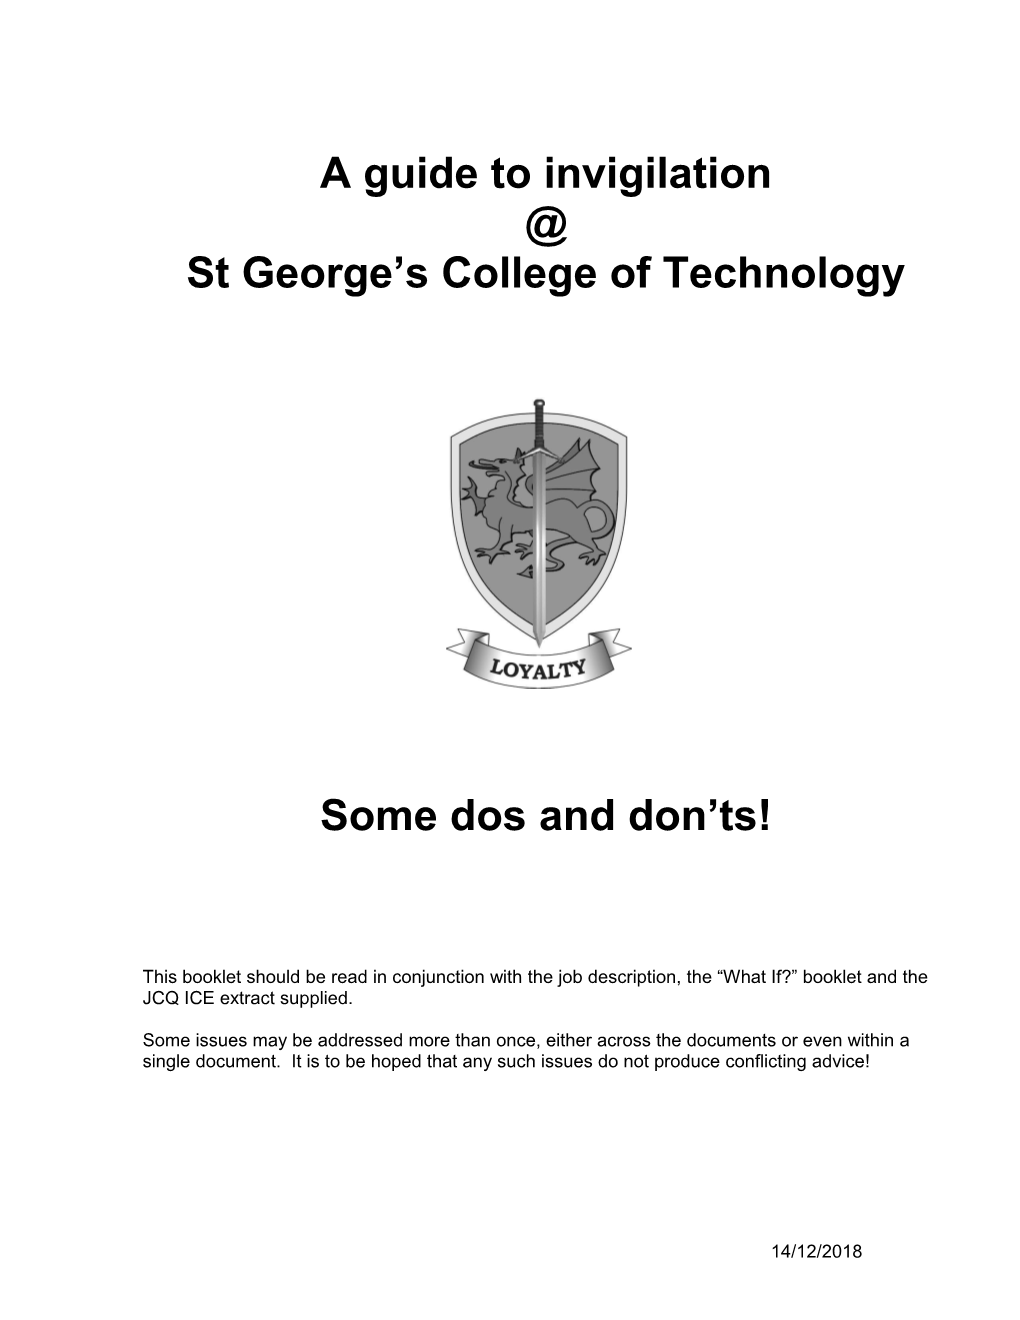 A Brief Guide to Invigilation Some Dos and Don Ts